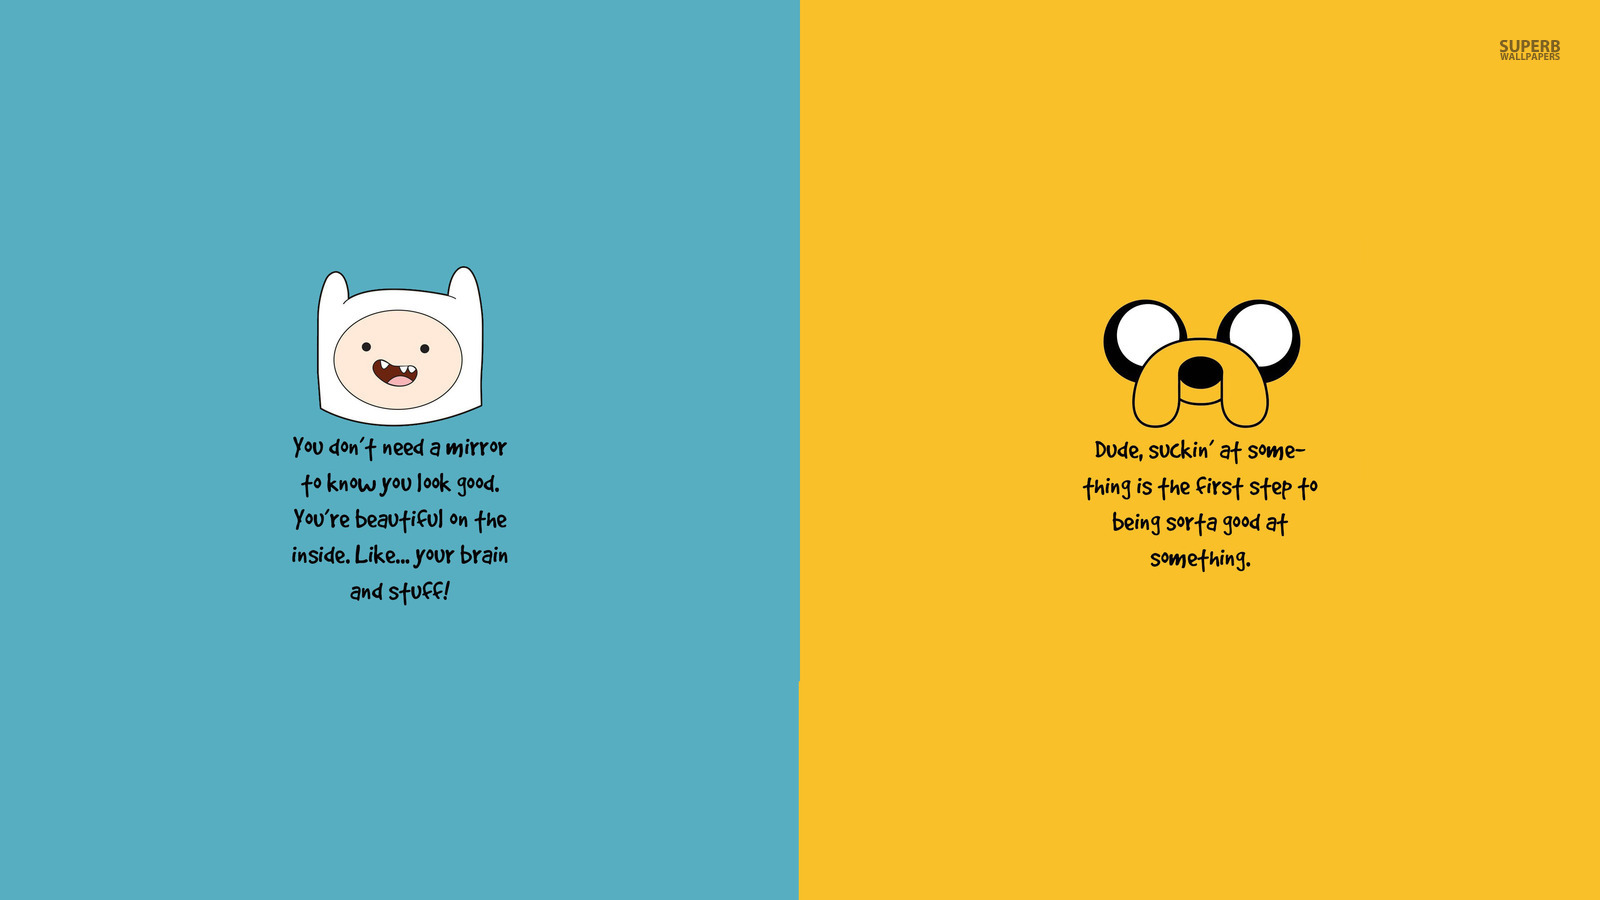 Adventure Time - Quotes Adventure Time - 1600x900 Wallpaper 